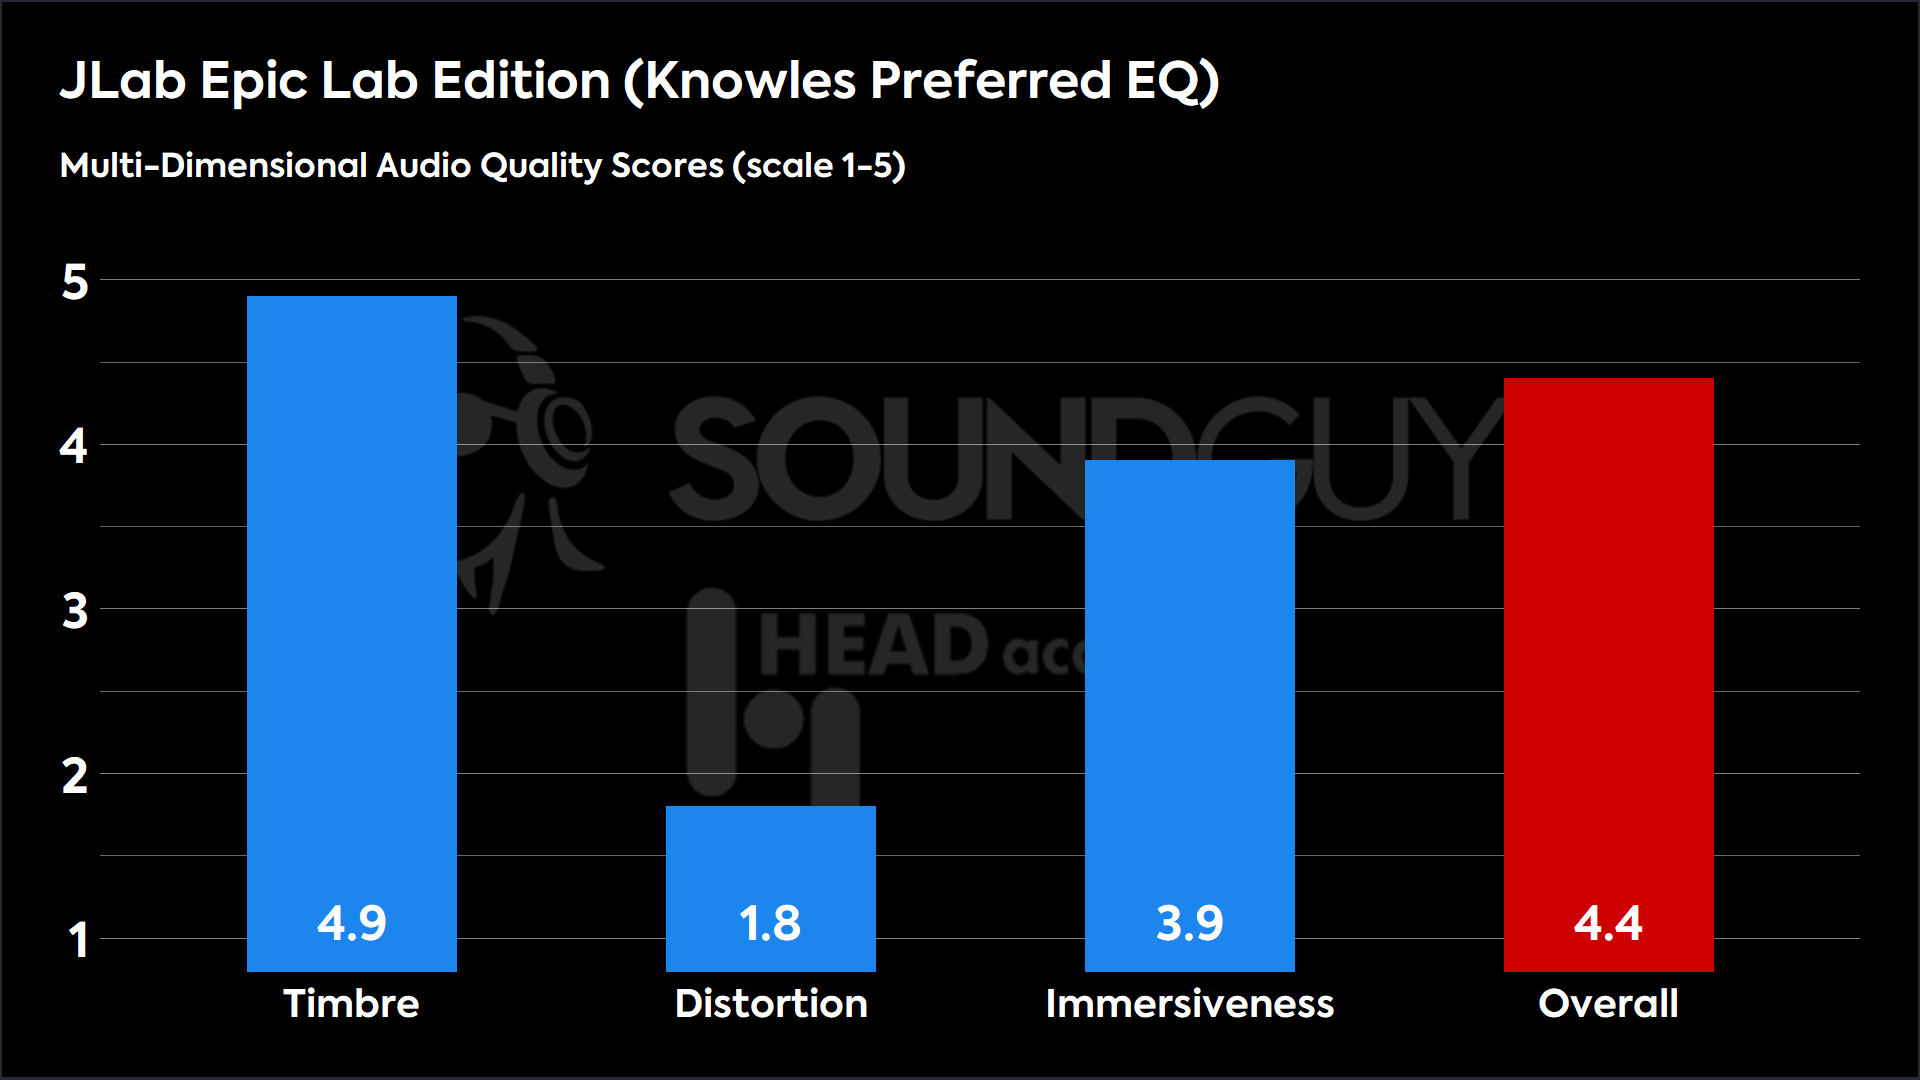 This chart shows the MDAQS results for the JLab Epic Lab Edition in Knowles Preferred EQ mode. The Timbre score is 4.9, The Distortion score is 1.8, the Immersiveness score is 3.9, and the Overall Score is 4.4).